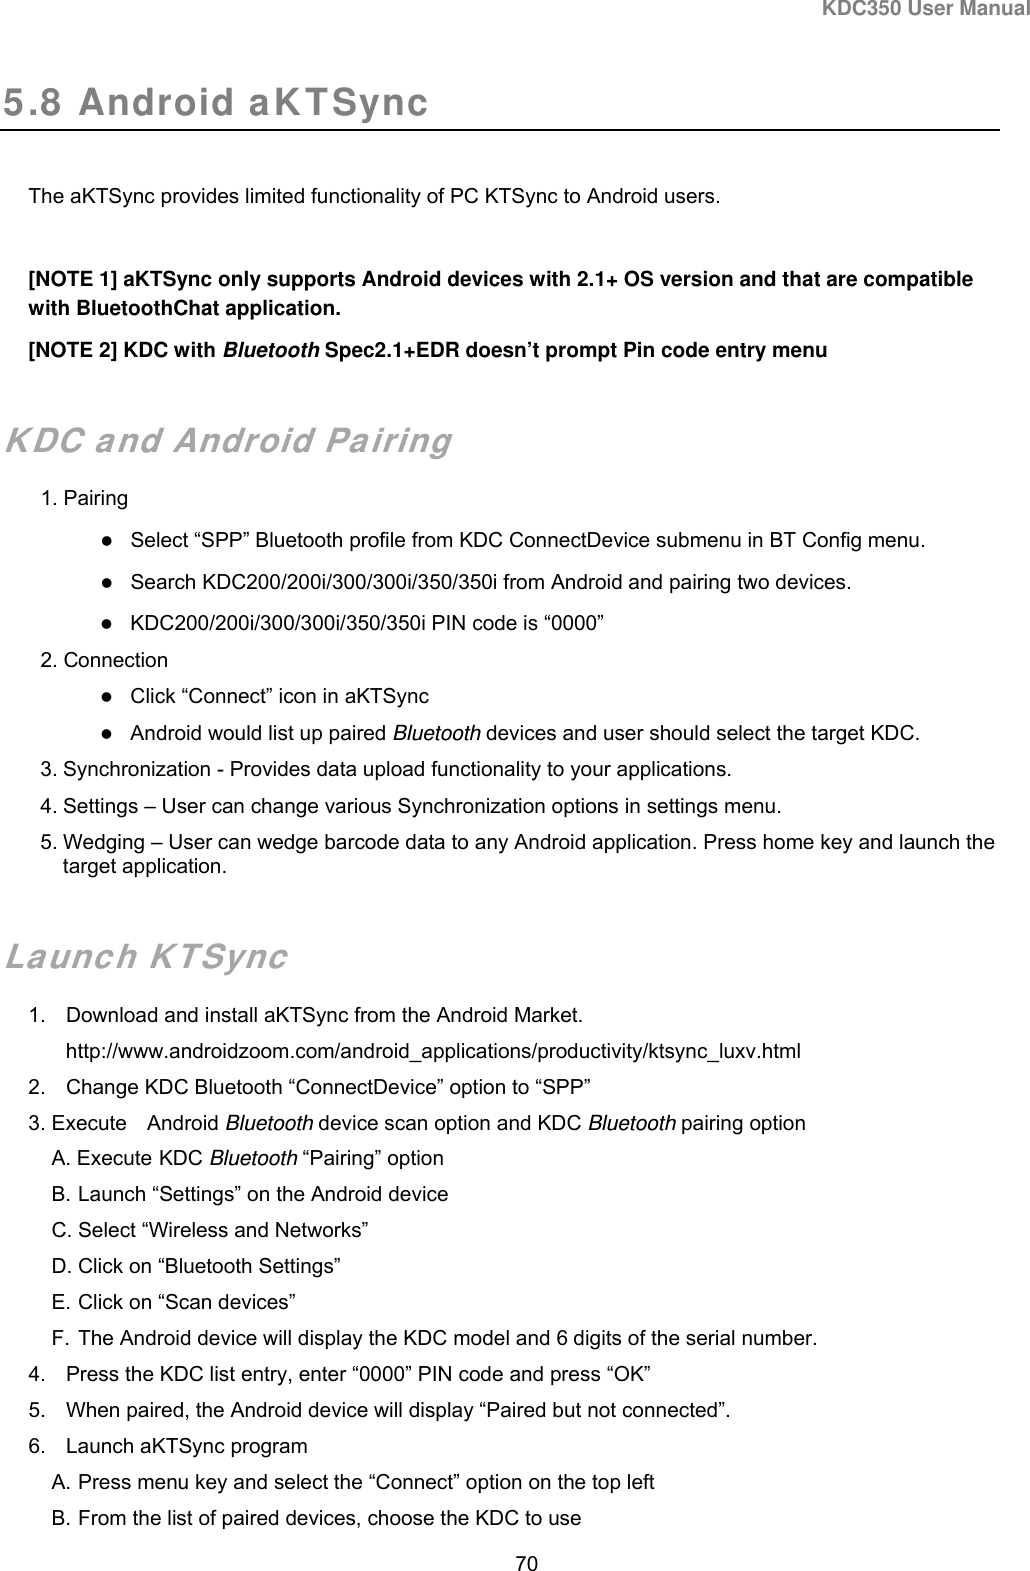 KDC350 User Manual  70  5.8 Android aKTSync  The aKTSync provides limited functionality of PC KTSync to Android users.   [NOTE 1] aKTSync only supports Android devices with 2.1+ OS version and that are compatible with BluetoothChat application.  [NOTE 2] KDC with Bluetooth Spec2.1+EDR doesn’t prompt Pin code entry menu  KDC and Android Pairing 1. Pairing  Select “SPP” Bluetooth profile from KDC ConnectDevice submenu in BT Config menu.  Search KDC200/200i/300/300i/350/350i from Android and pairing two devices.  KDC200/200i/300/300i/350/350i PIN code is “0000” 2. Connection  Click “Connect” icon in aKTSync  Android would list up paired Bluetooth devices and user should select the target KDC. 3. Synchronization - Provides data upload functionality to your applications. 4. Settings – User can change various Synchronization options in settings menu. 5. Wedging – User can wedge barcode data to any Android application. Press home key and launch the target application.   Launch KTSync 1.  Download and install aKTSync from the Android Market. http://www.androidzoom.com/android_applications/productivity/ktsync_luxv.html 2.  Change KDC Bluetooth “ConnectDevice” option to “SPP” 3. Execute Android Bluetooth device scan option and KDC Bluetooth pairing option A. Execute KDC Bluetooth “Pairing” option  B. Launch “Settings” on the Android device C. Select “Wireless and Networks” D. Click on “Bluetooth Settings” E. Click on “Scan devices” F. The Android device will display the KDC model and 6 digits of the serial number.  4.  Press the KDC list entry, enter “0000” PIN code and press “OK” 5.  When paired, the Android device will display “Paired but not connected”. 6.  Launch aKTSync program  A. Press menu key and select the “Connect” option on the top left B. From the list of paired devices, choose the KDC to use 